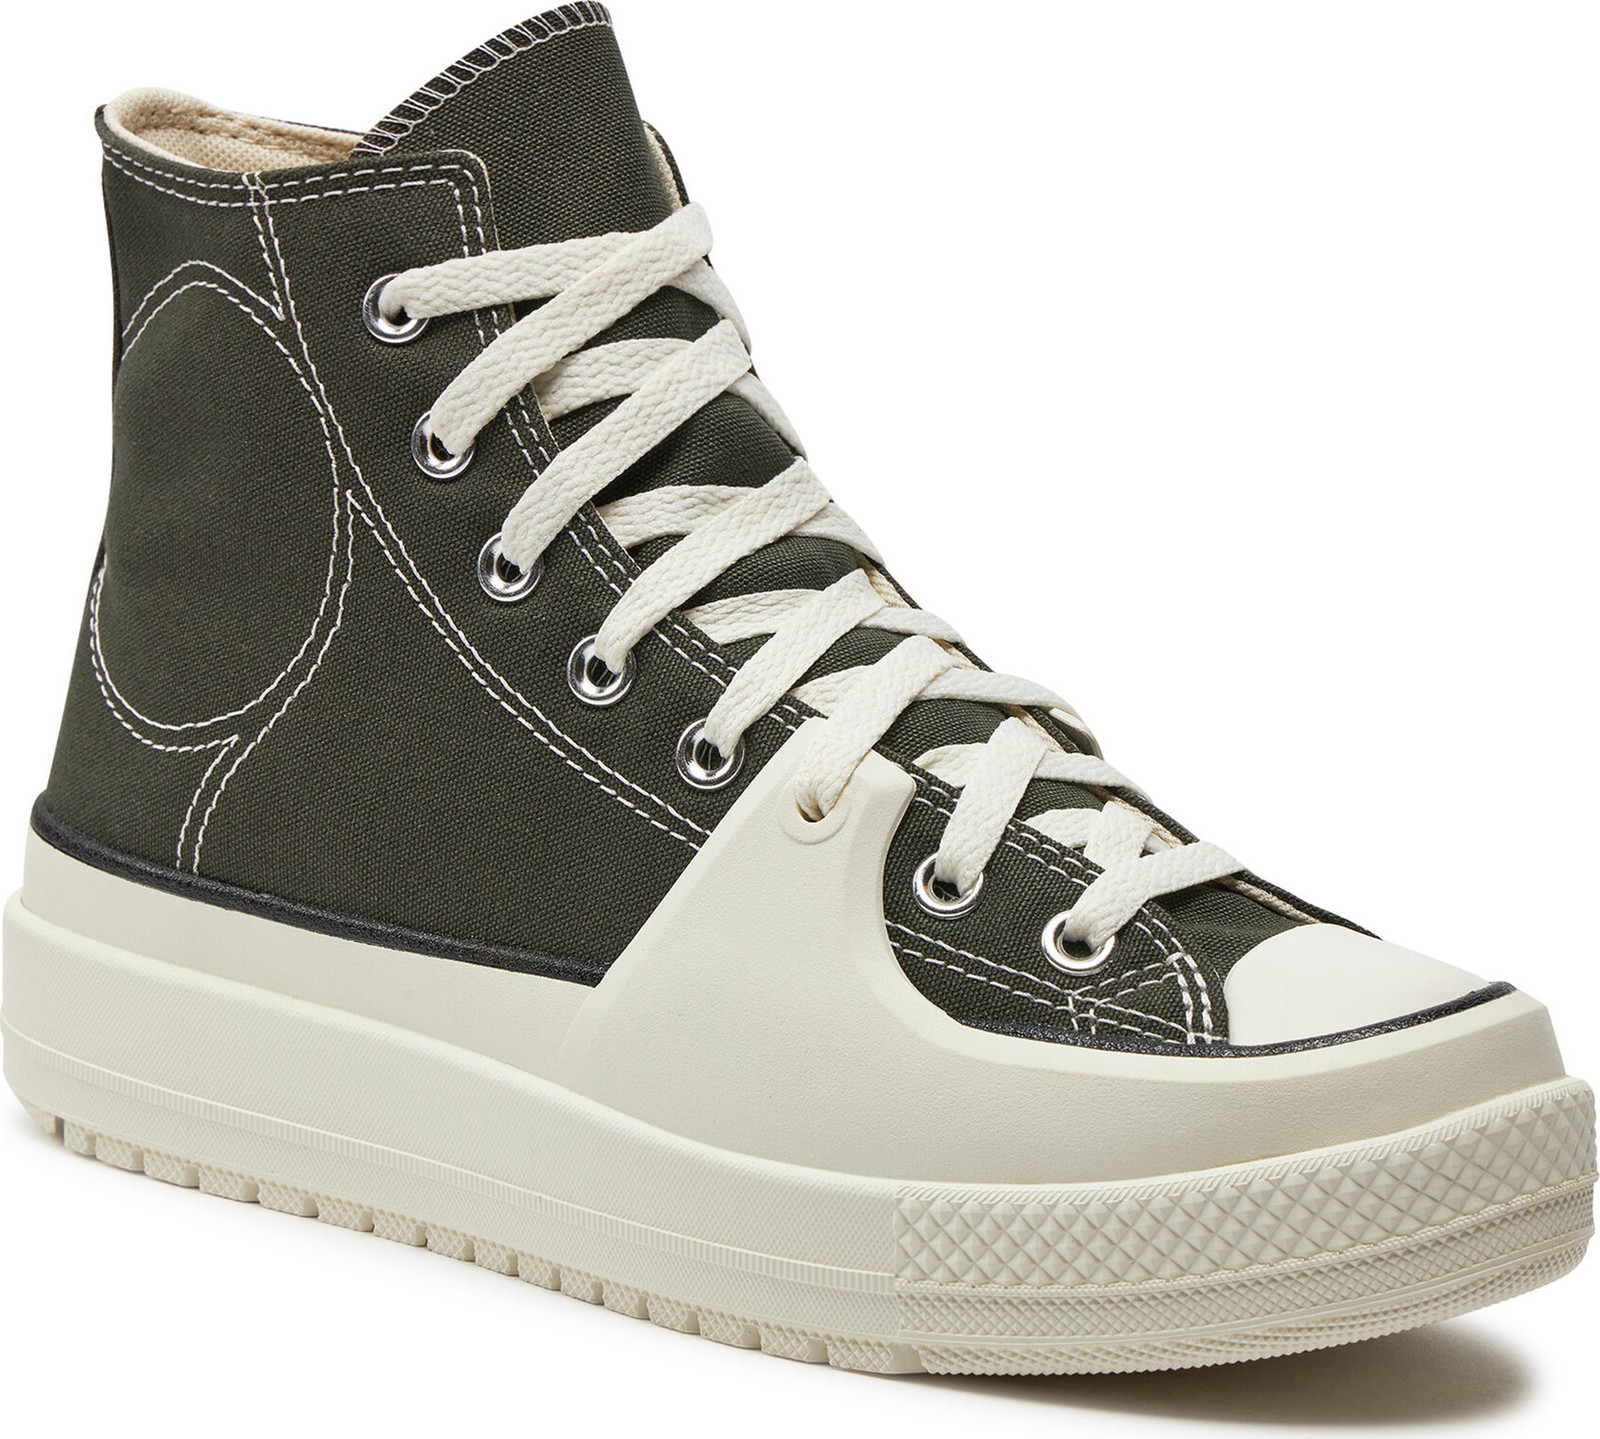 Plátěnky Converse Chuck Taylor All Star Construct A06618C Cave Green/Black/White